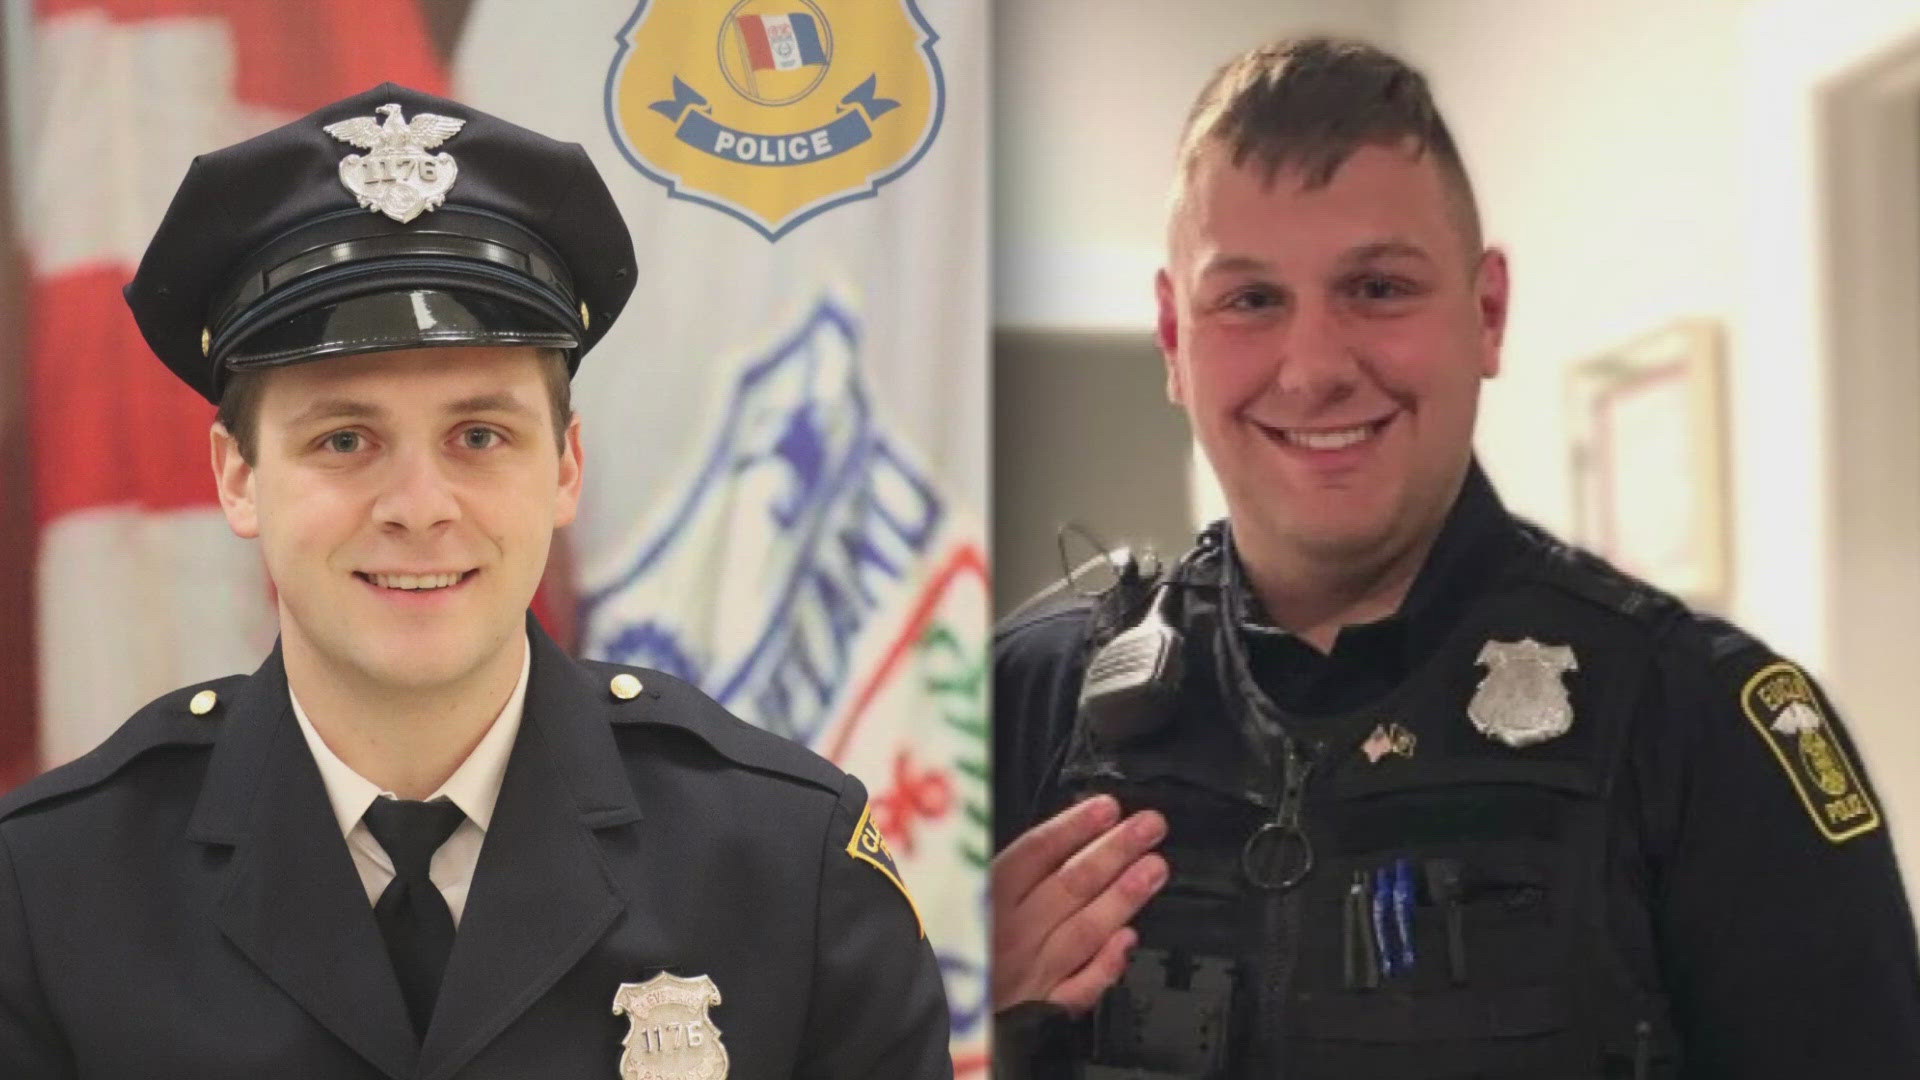 Officer Ritter's death came less than two months after Euclid police officer Jacob Ritter was killed in the line of duty.